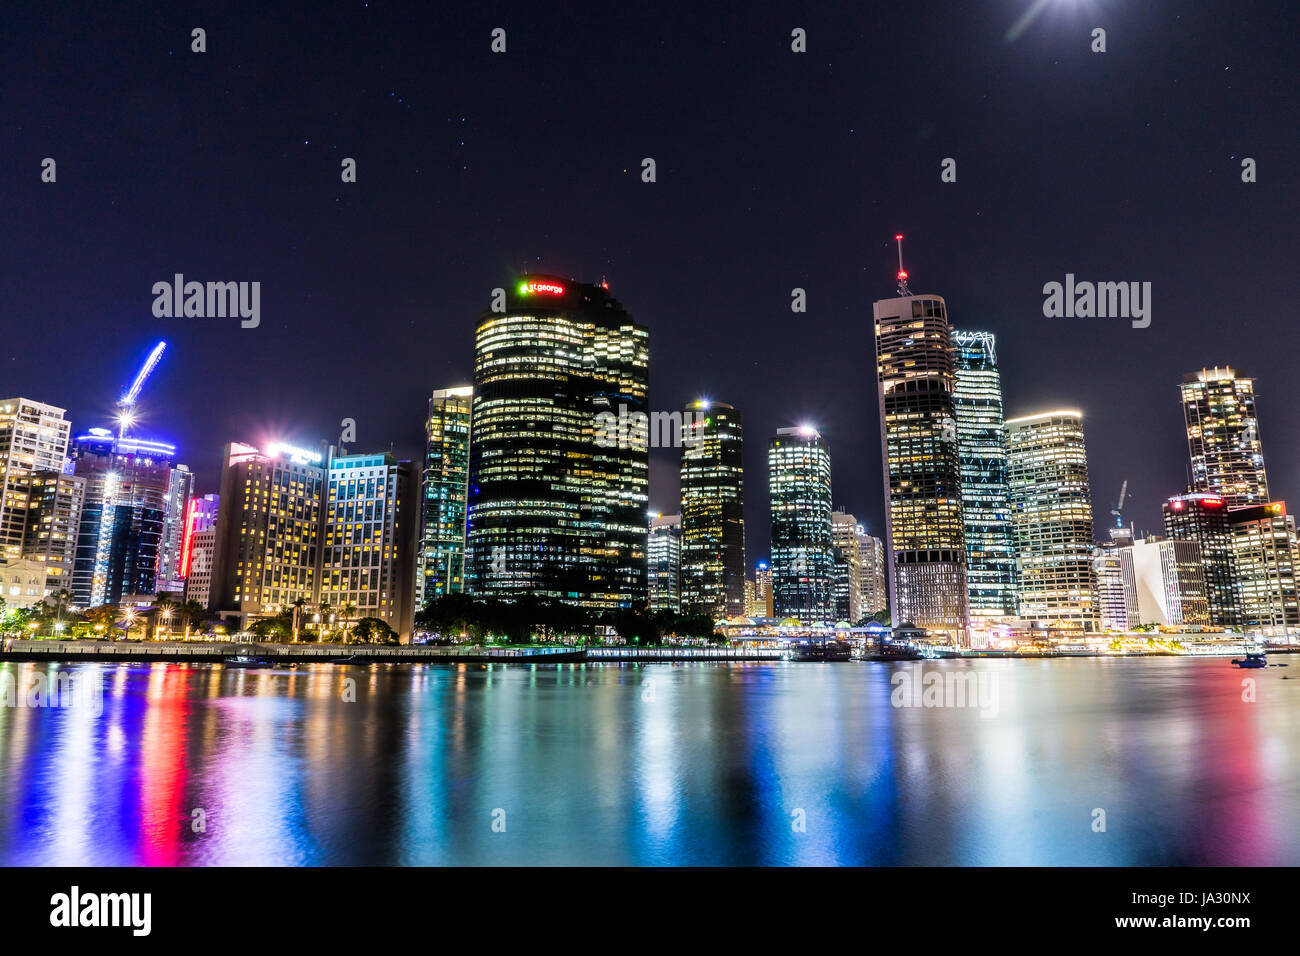 Brisbane city nighttime long exposure with relections Stock Photo